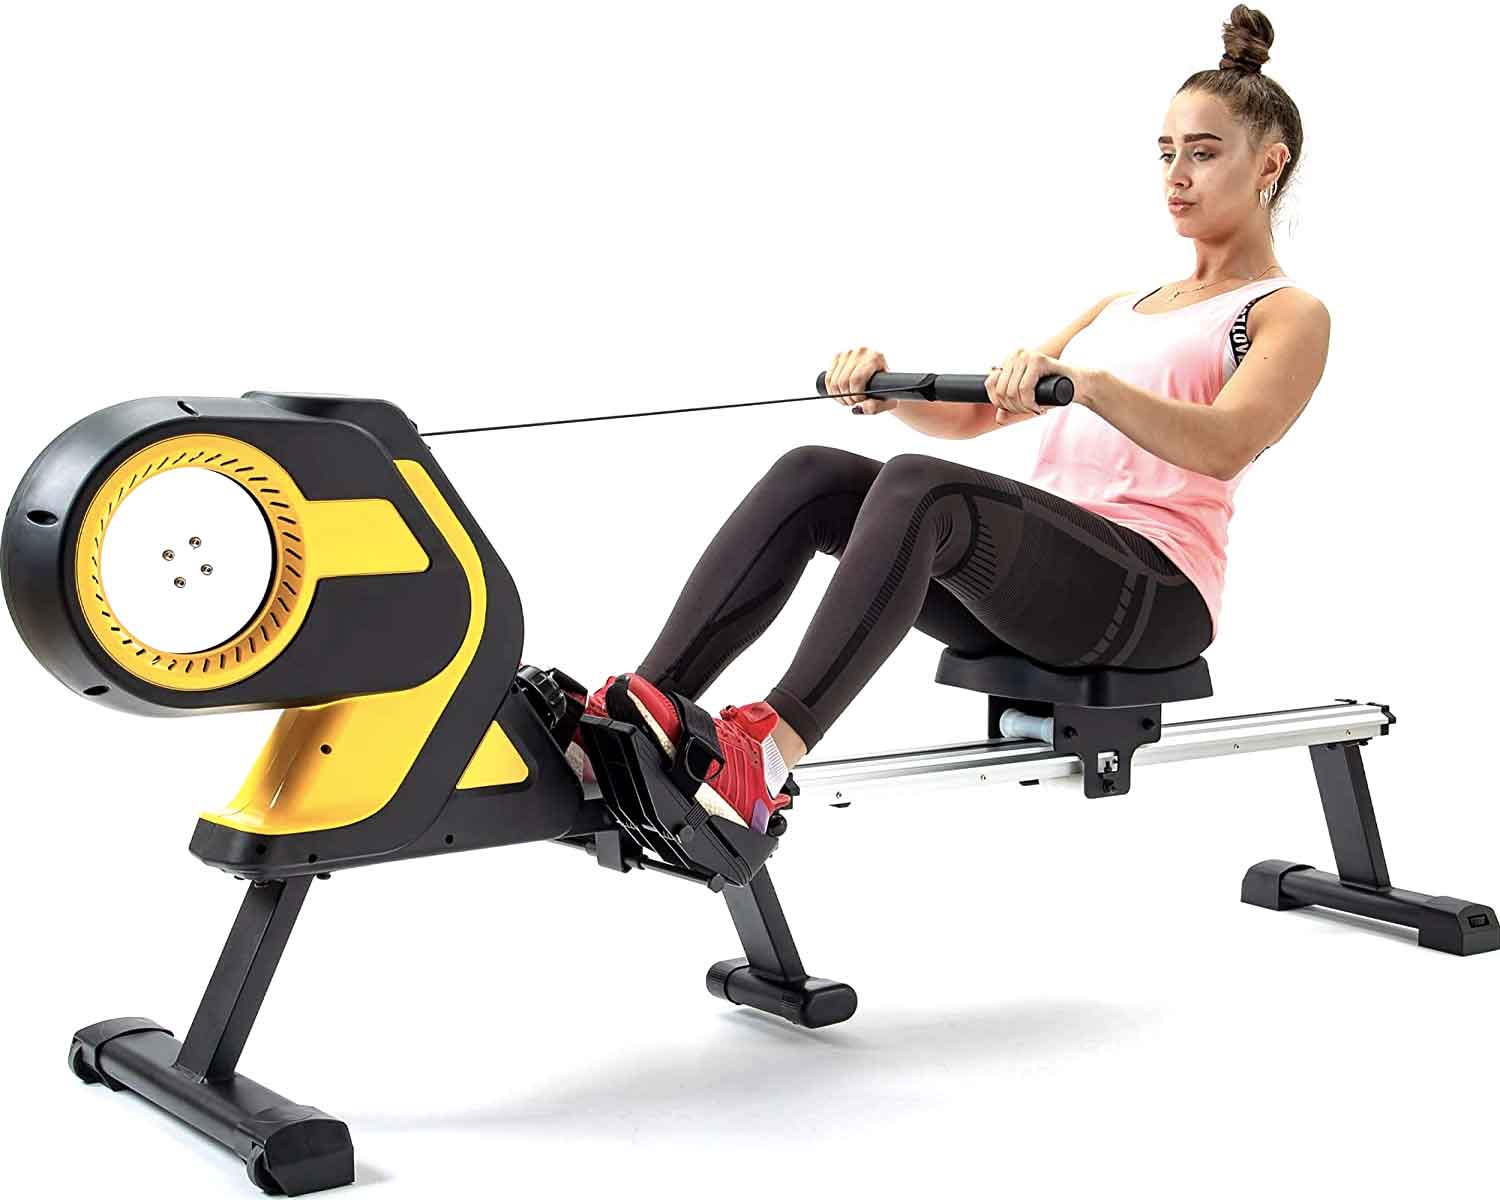 Rowing Machine Home Rower Magnetic Exercise with LCD Performance Monitor, Indoor Rower Machine with 46 Inch Slide Rail Silver Black Yellow